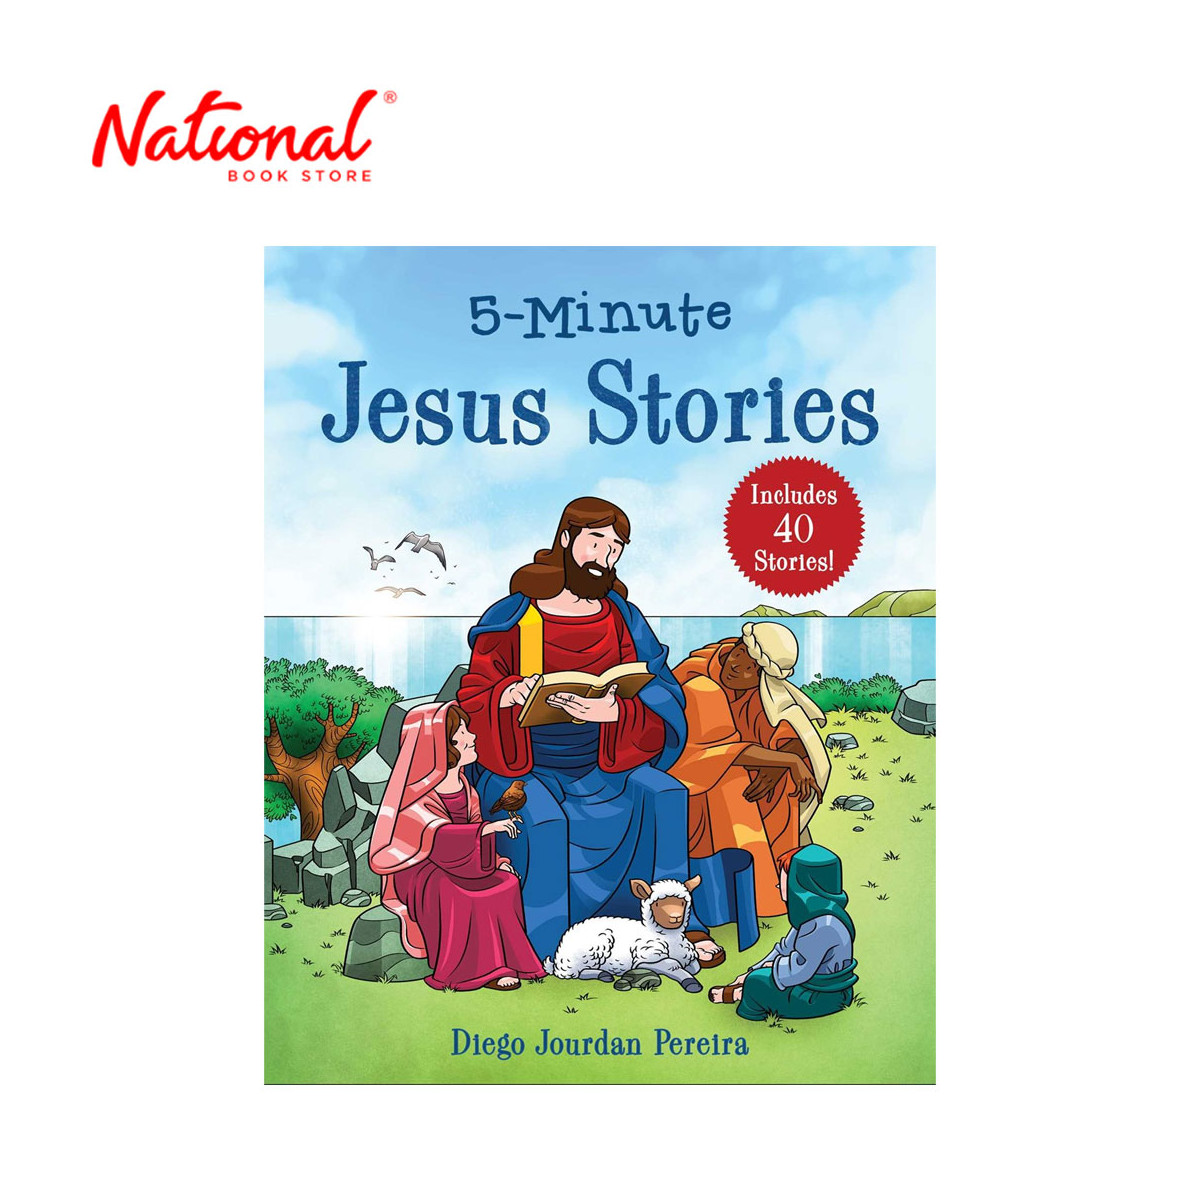 5-Minute Jesus Stories: Includes 40 Stories By Diego Jourdan Pereira - Hardcover - Bible Stories